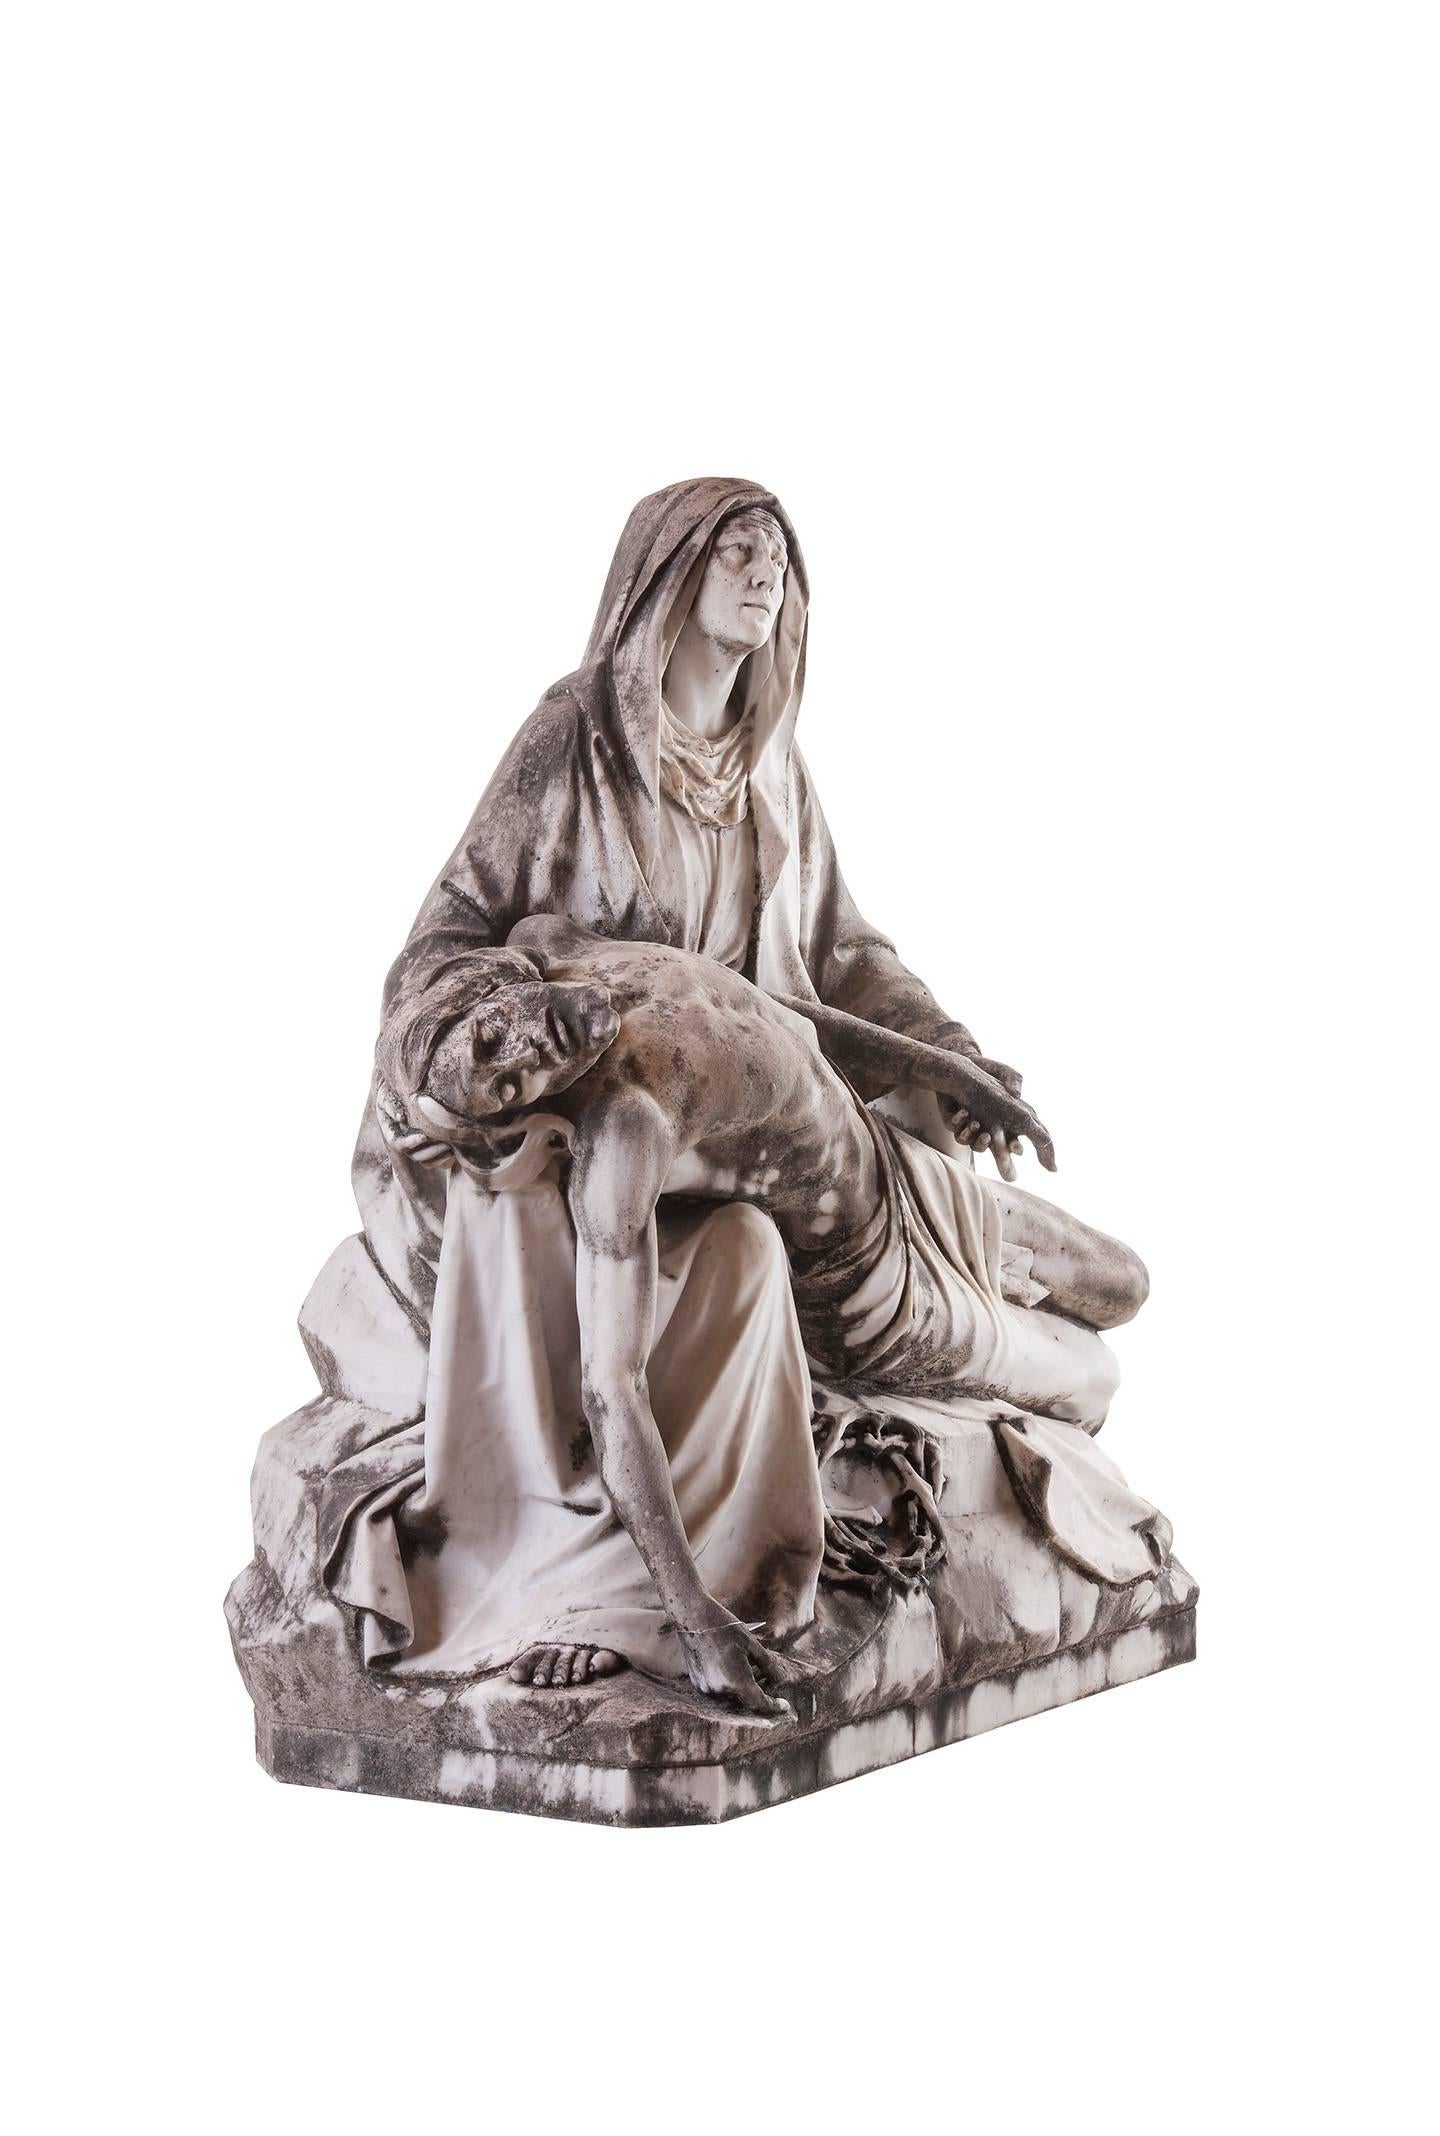 This is a rare pieta in an excellent quality.
Masterful and unique work from the 19th century.
One broken spot at a finger
Dimensions: 90cm (35in.) tall, base stone 80 x 38cm (32 x 15in.)
